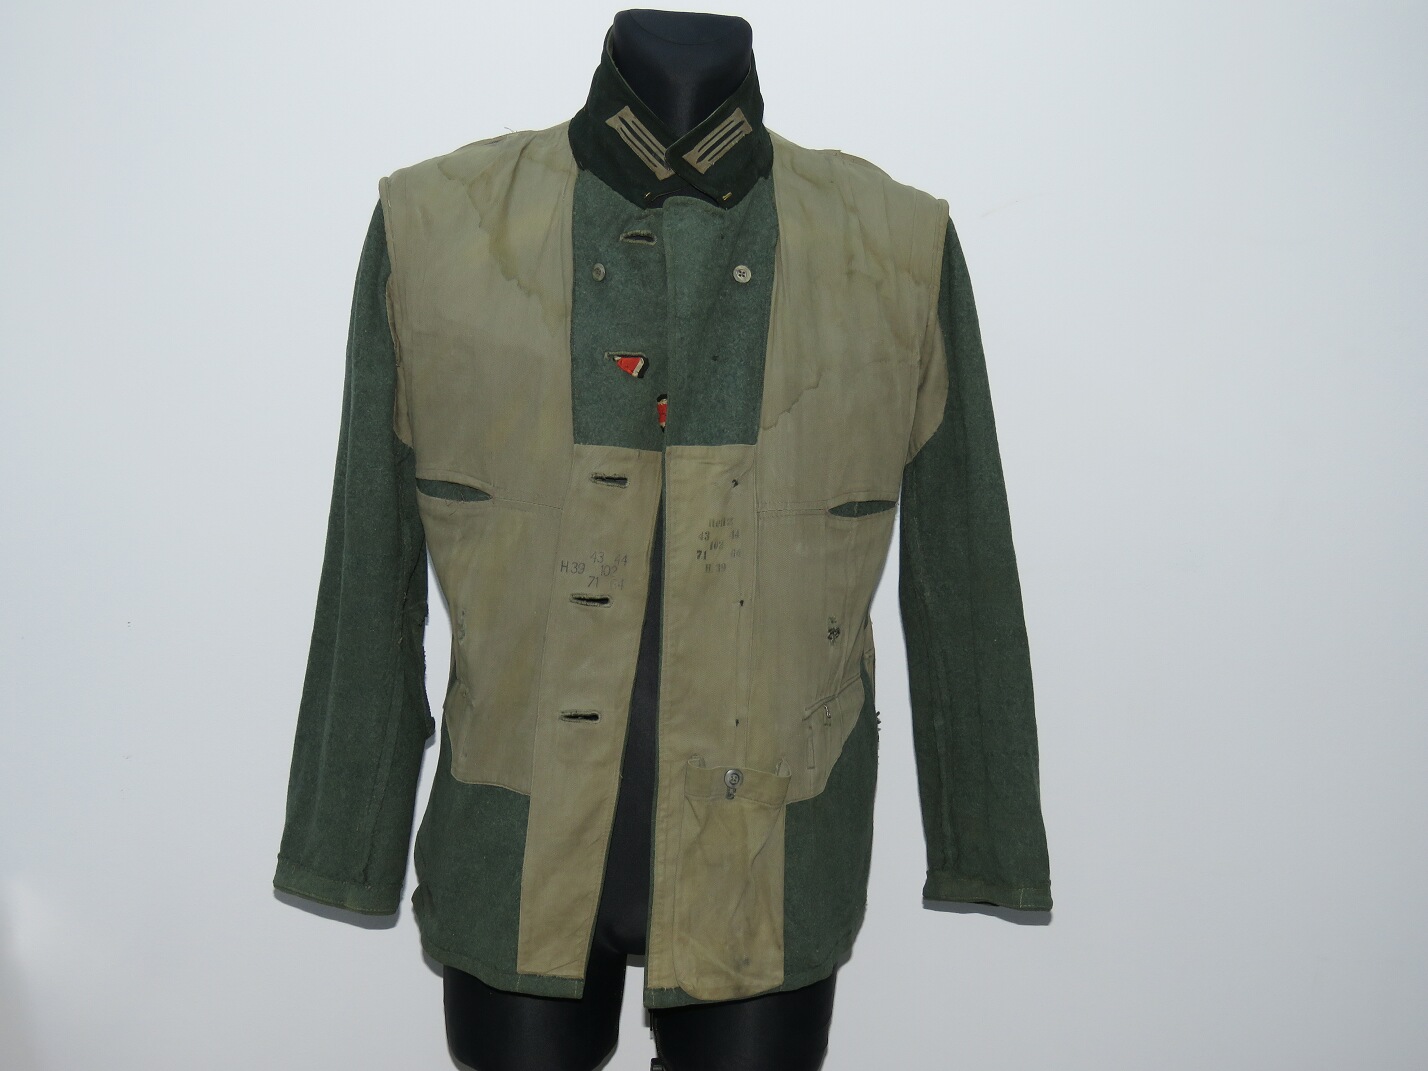 M36 enlisted personnel tunic for Panzerjäger of the Wehrmacht